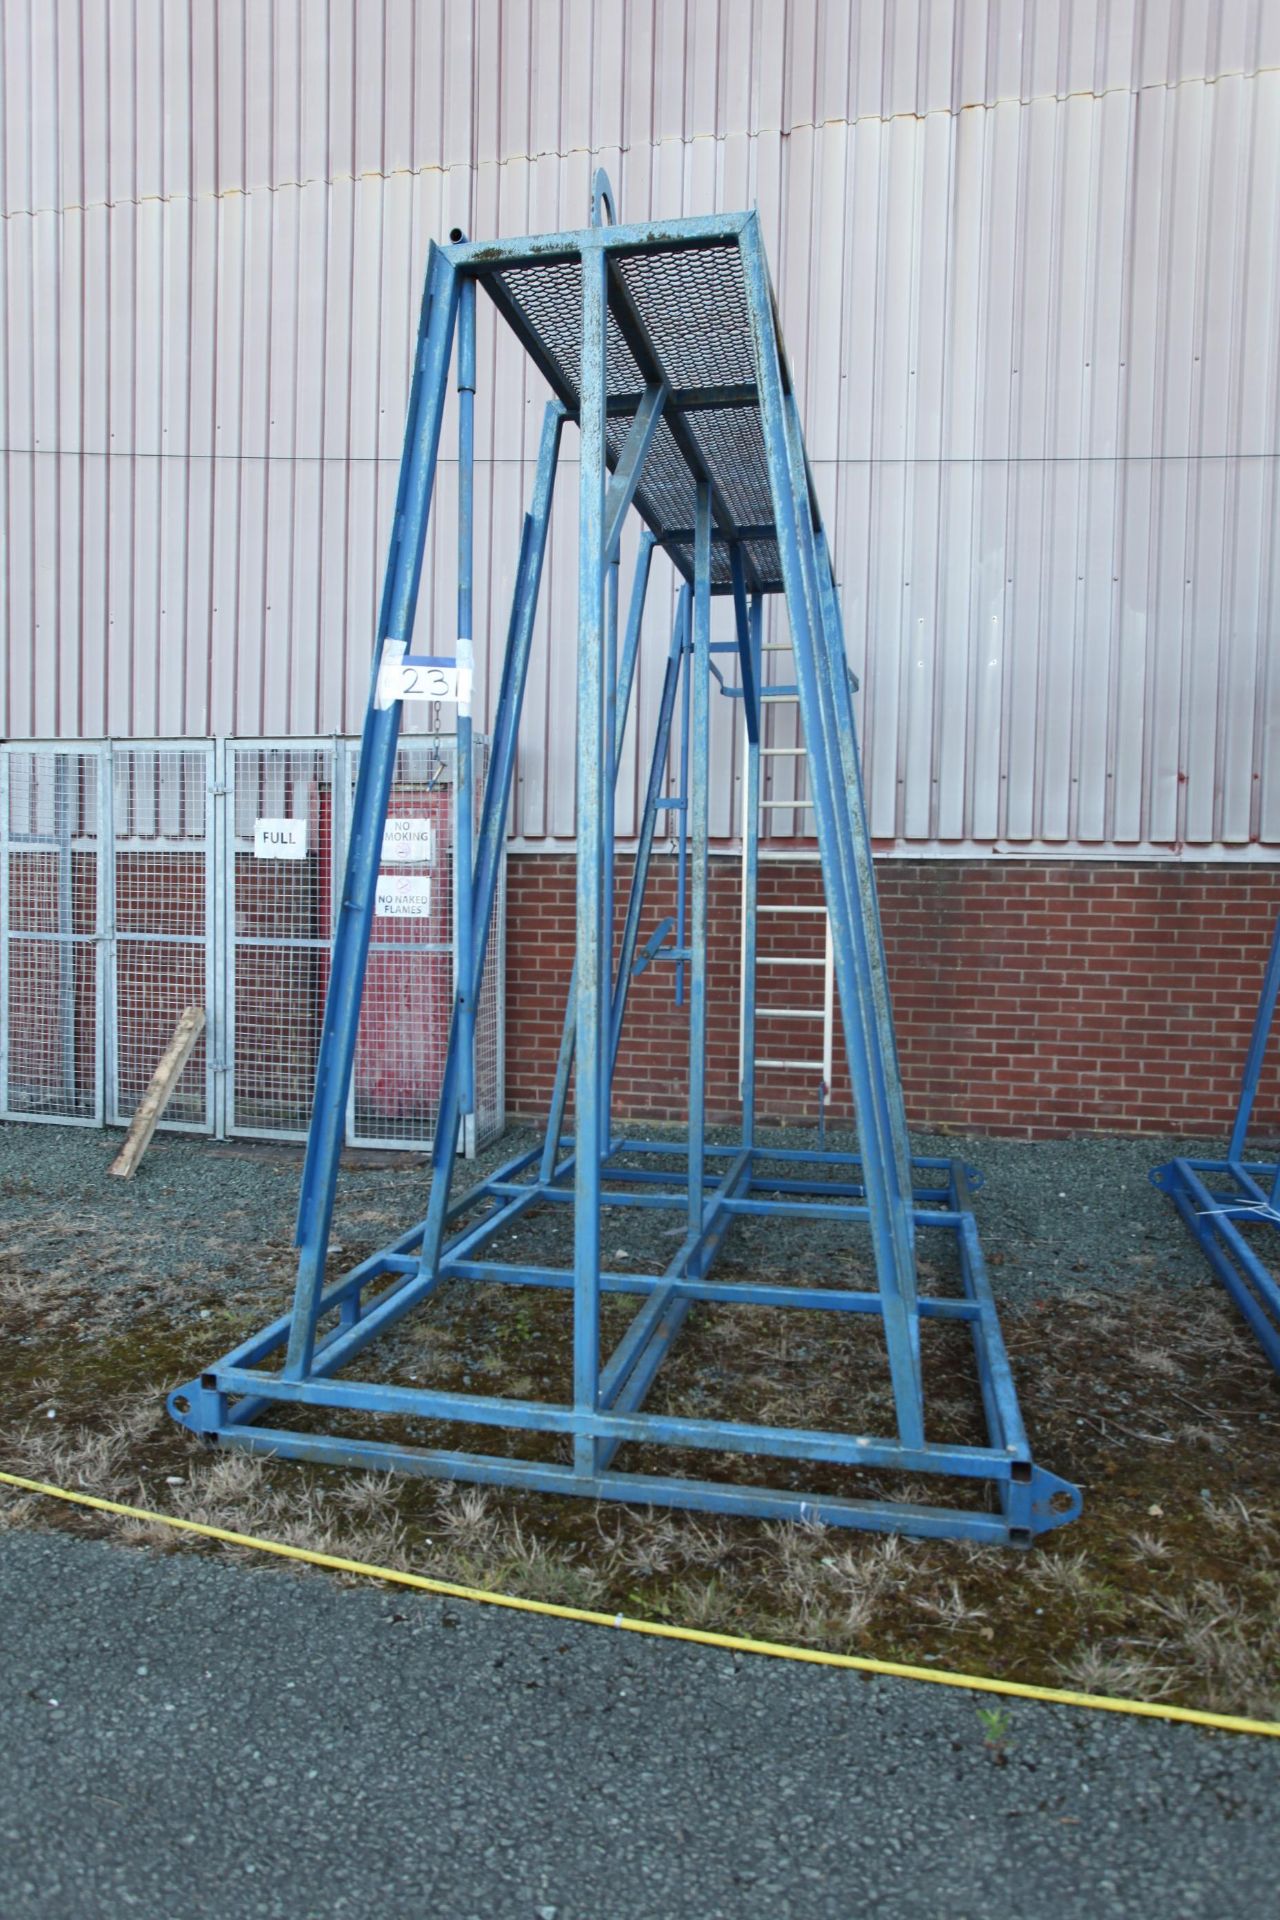 Apex lifting frame , free loading onto purchasers transport - yes, item located in Unicorn Road - Image 2 of 4